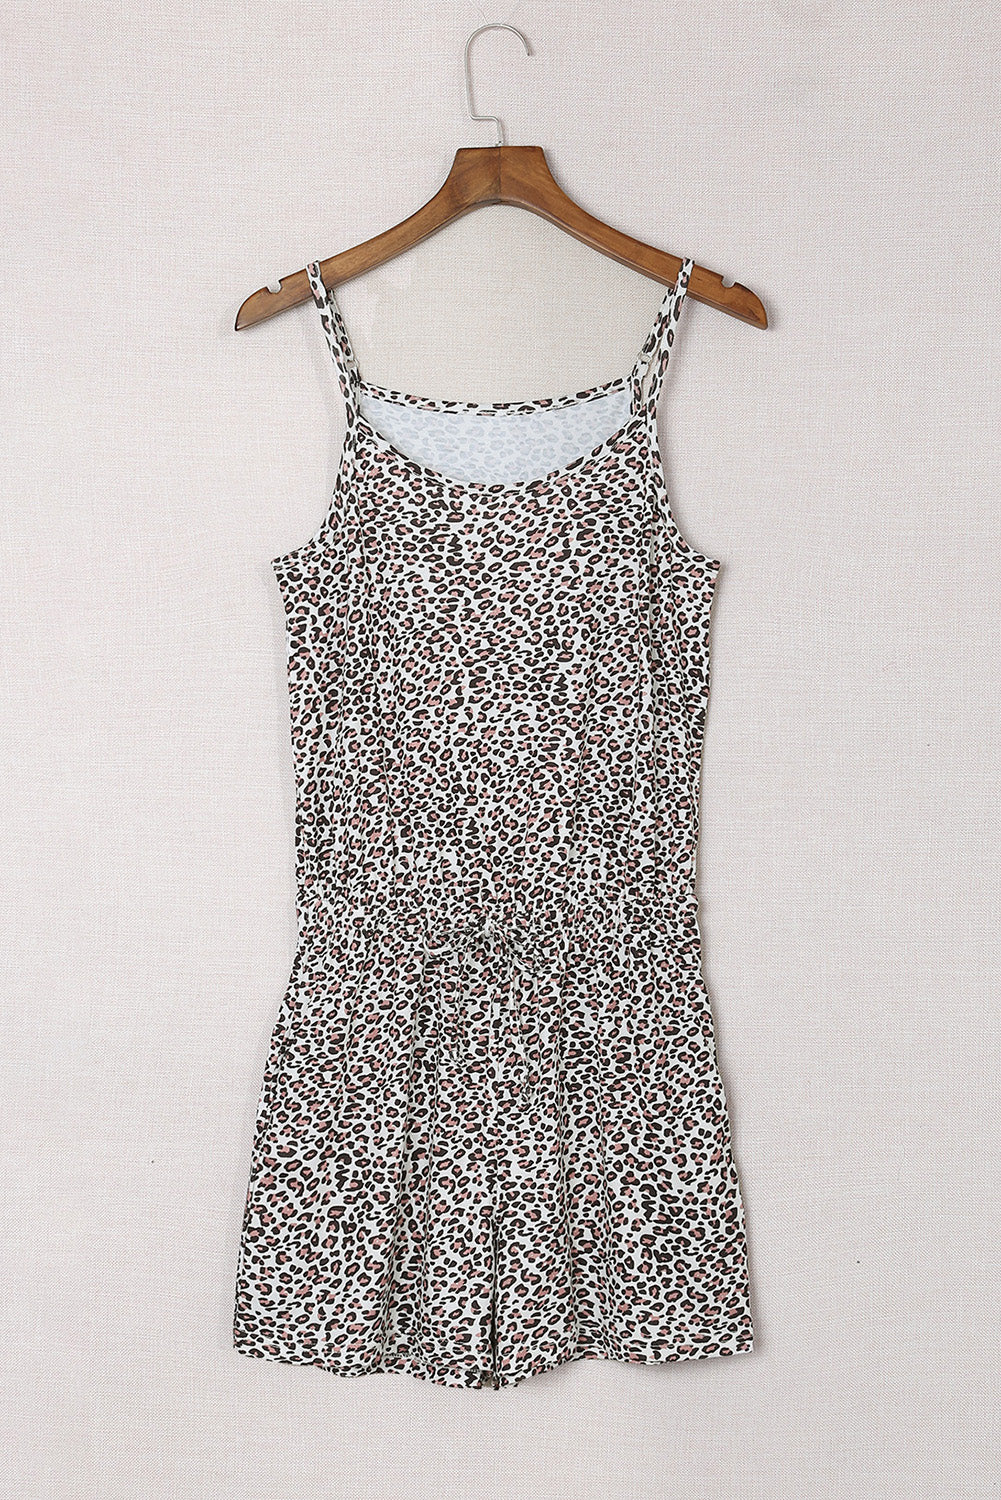 LC641622-17-S, LC641622-17-M, LC641622-17-L, LC641622-17-XL, Brown Leopard Accent Sleeveless Short Two Piece Romper Set